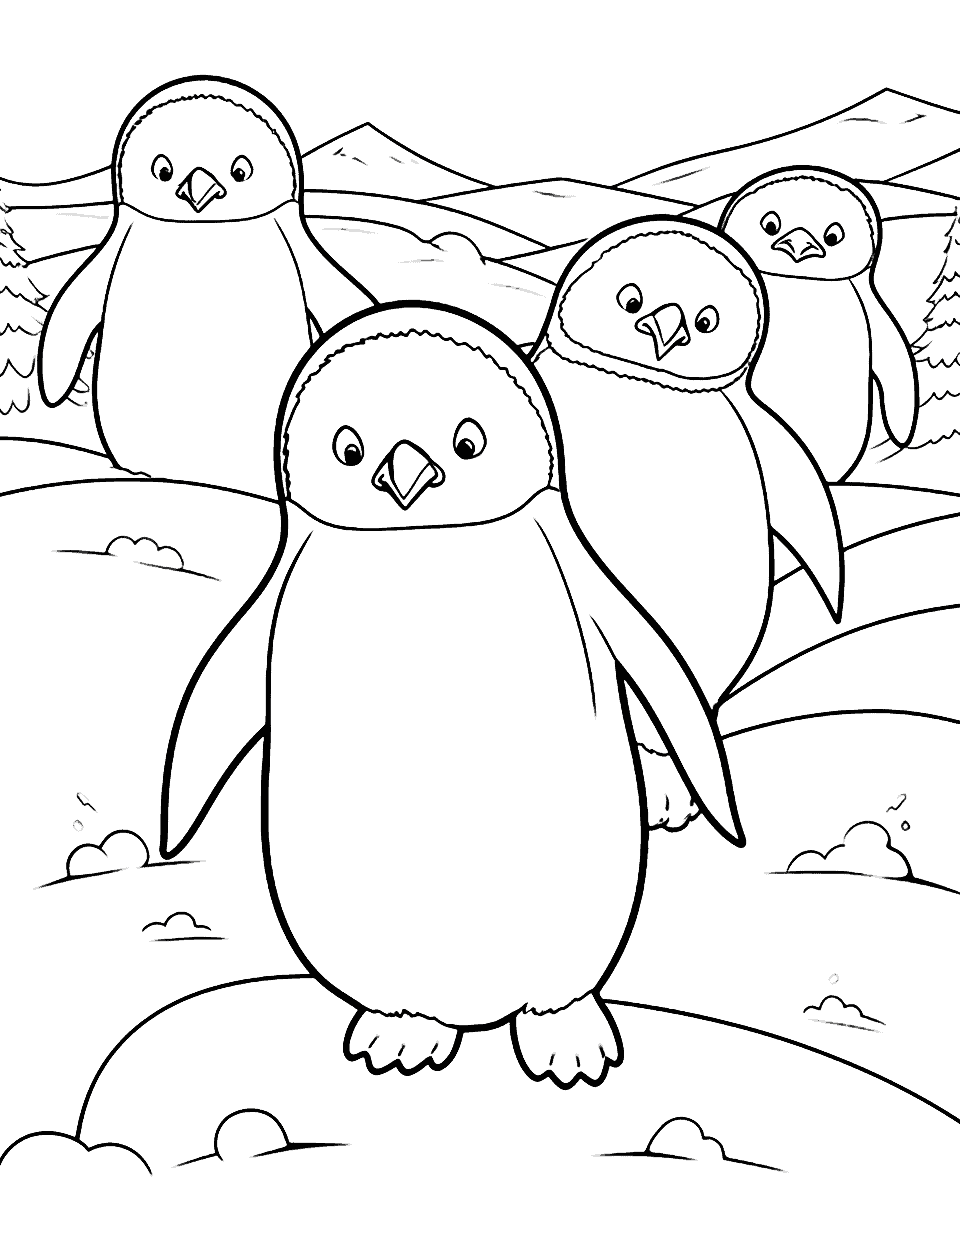 Happy Penguins Animal Coloring Page - A group of penguins sliding on their bellies, having a fun time in the snow.